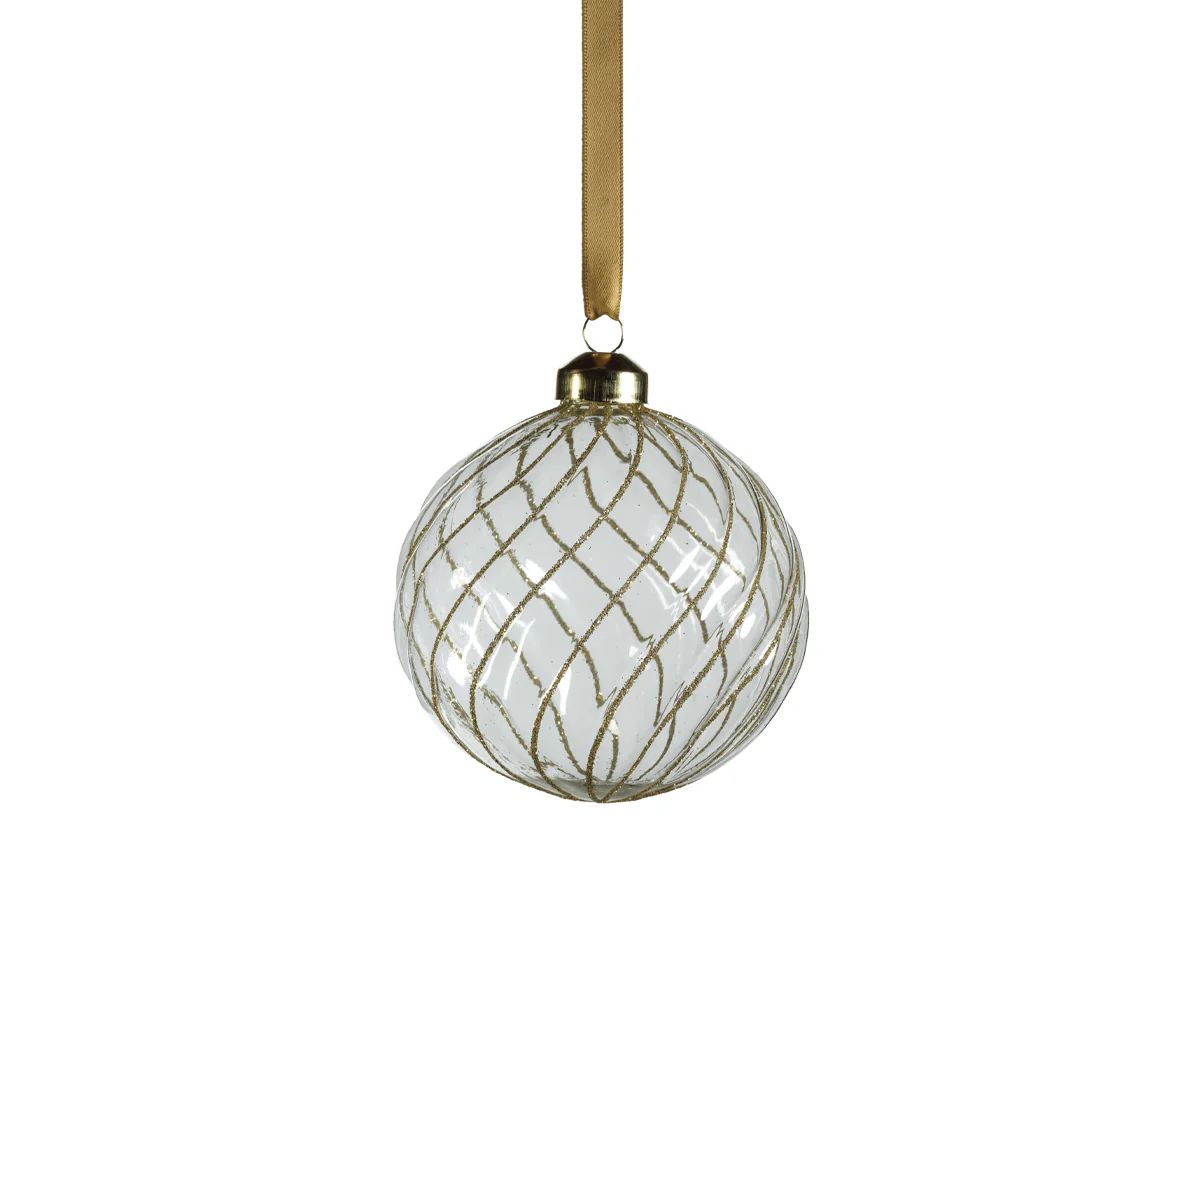 Gold Swirl Ornament | Tuesday Made